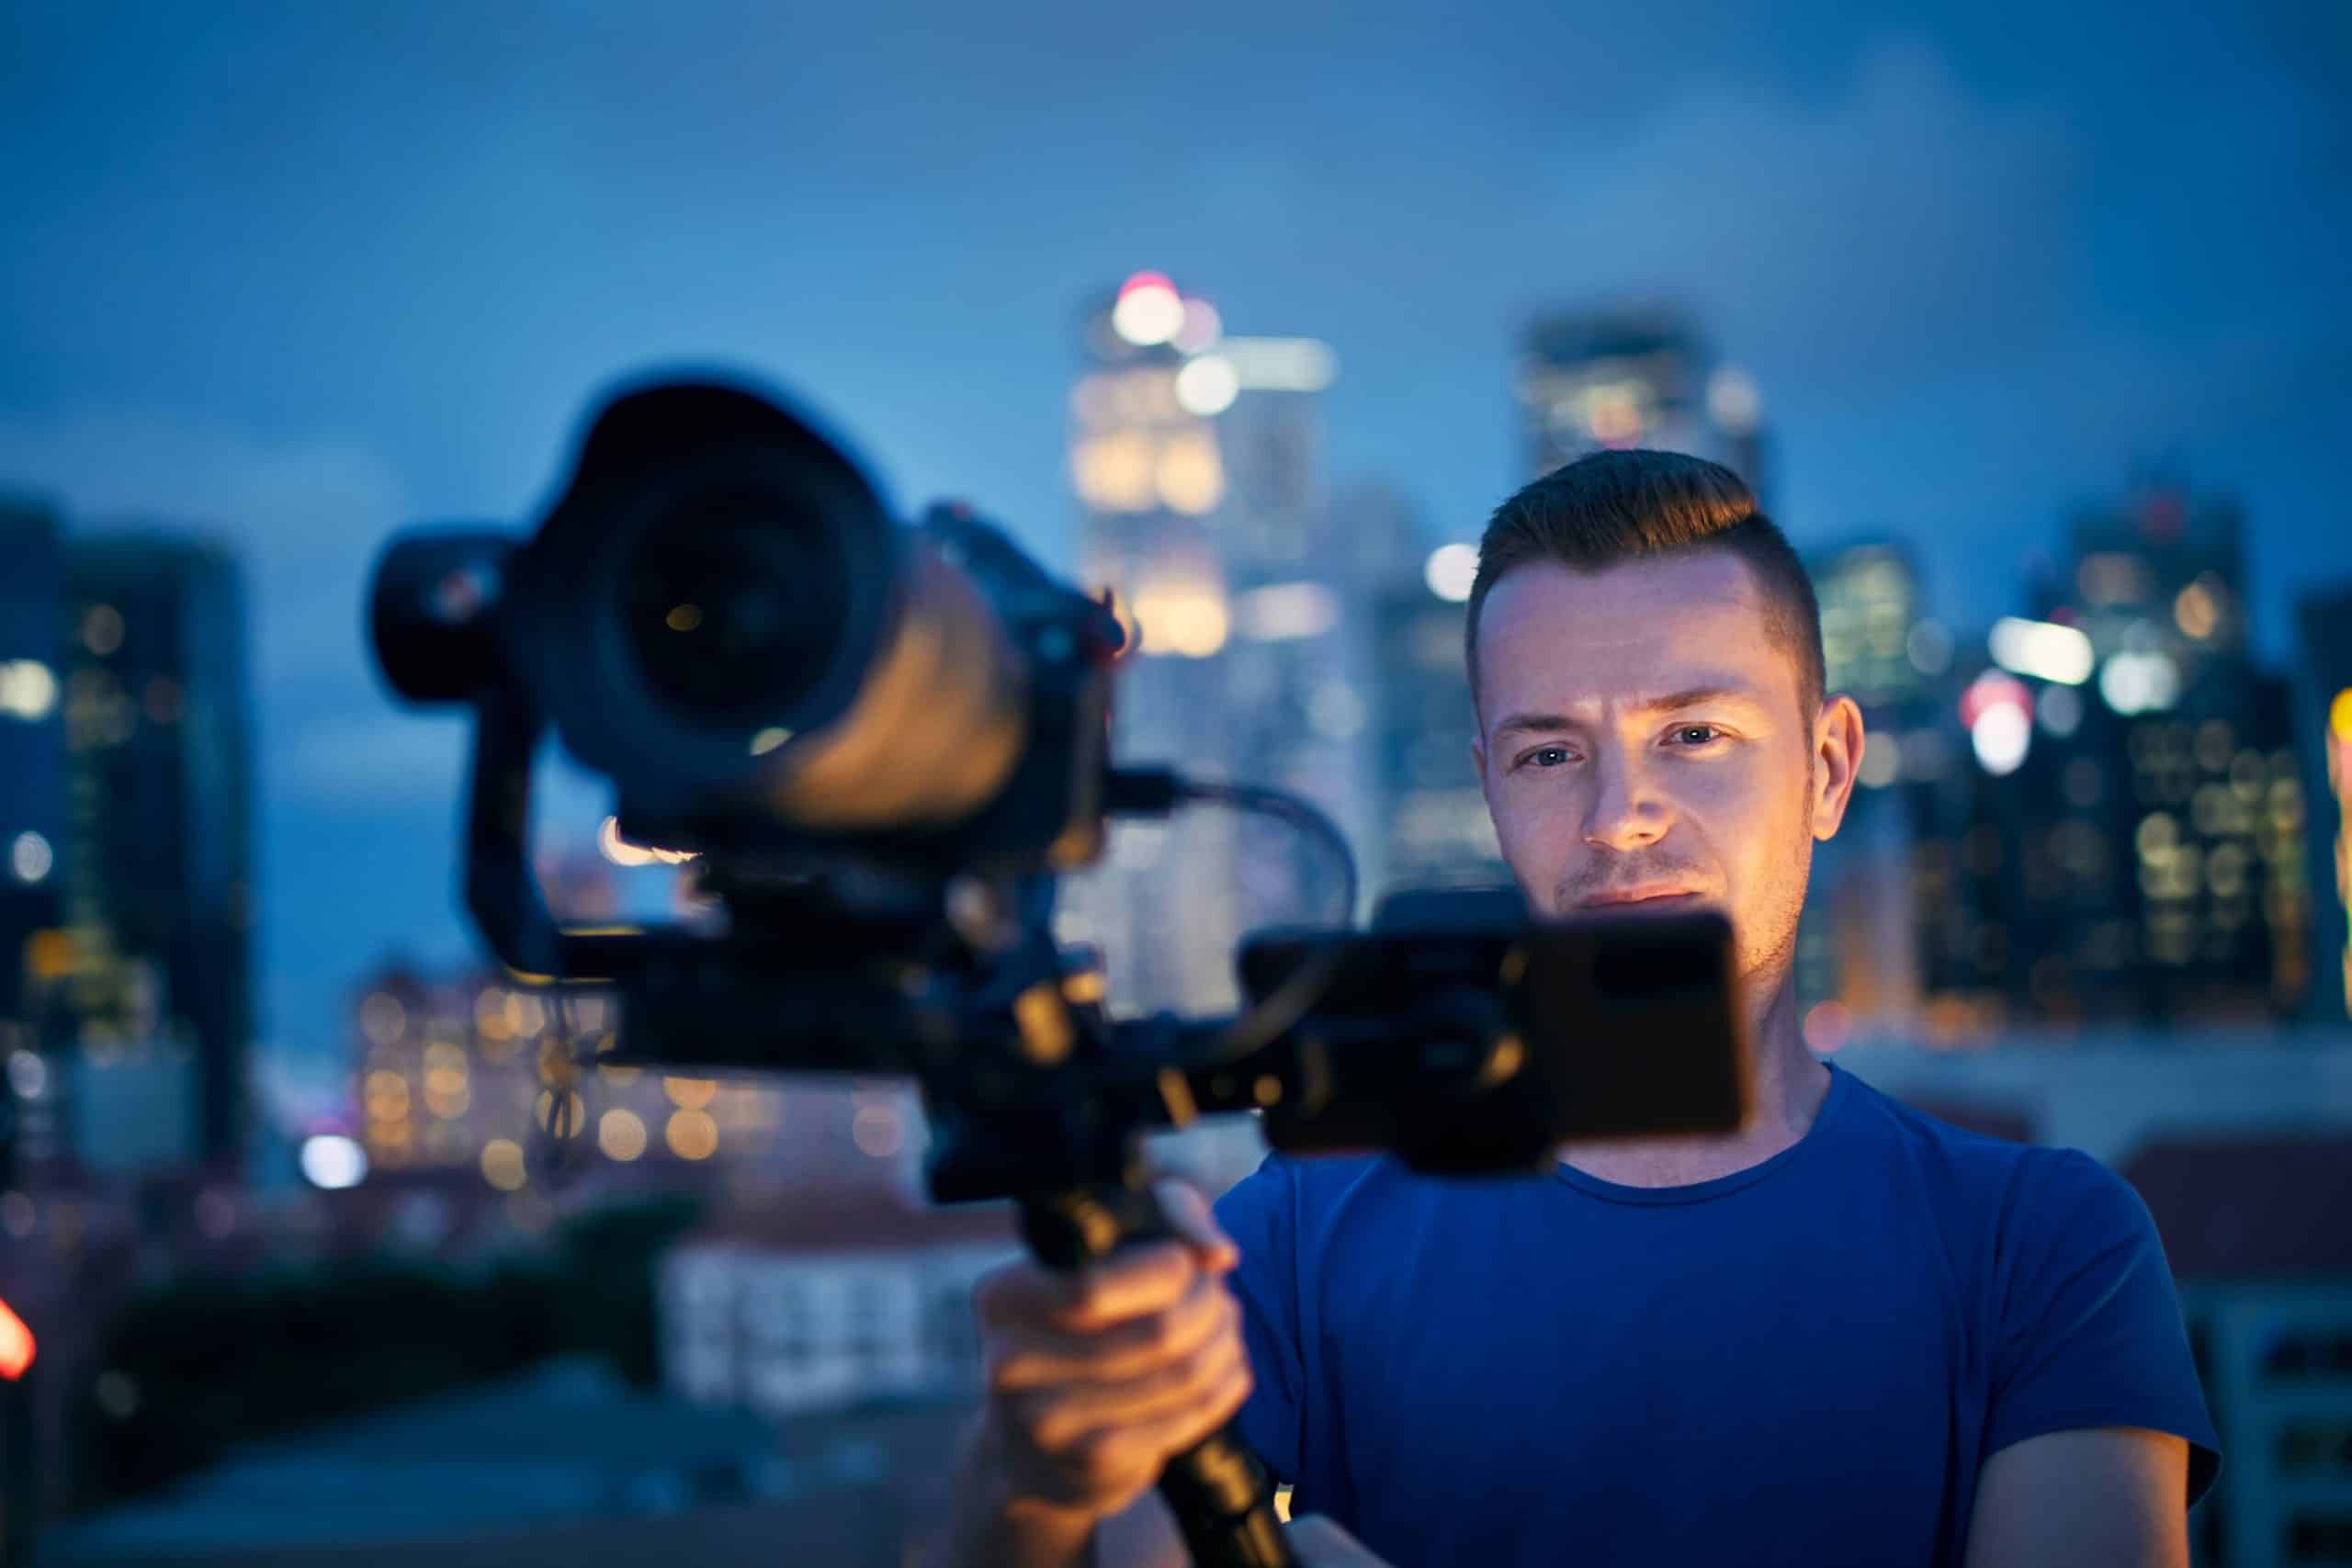 The skills needed to be a documentary filmmaker